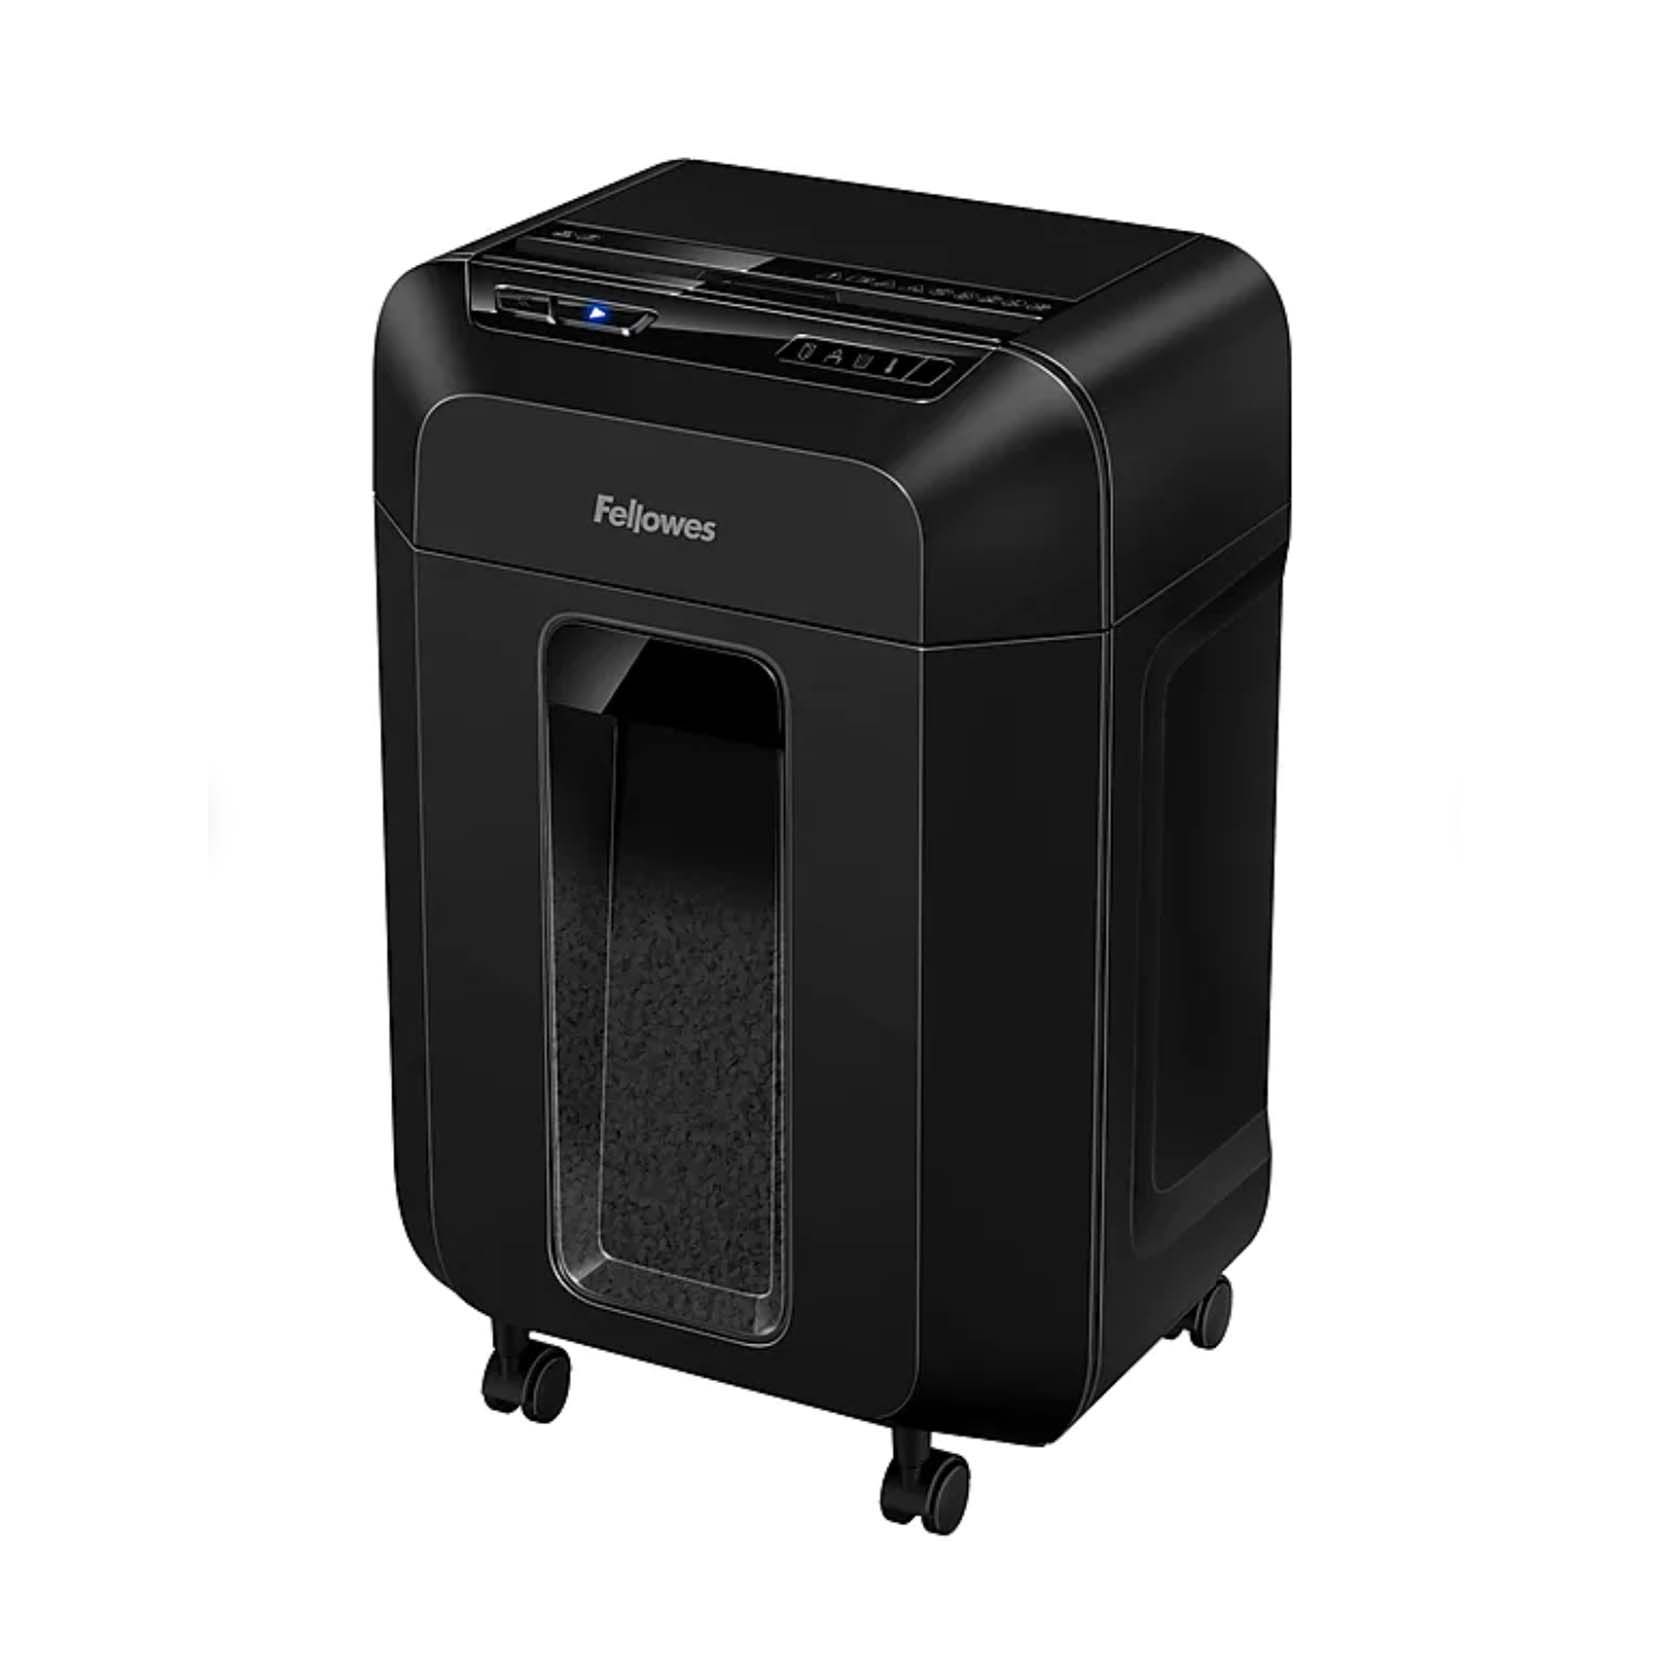 Fellowes AutoMax 100MA 100-sheet Microcut Shredder with pull-out bin 